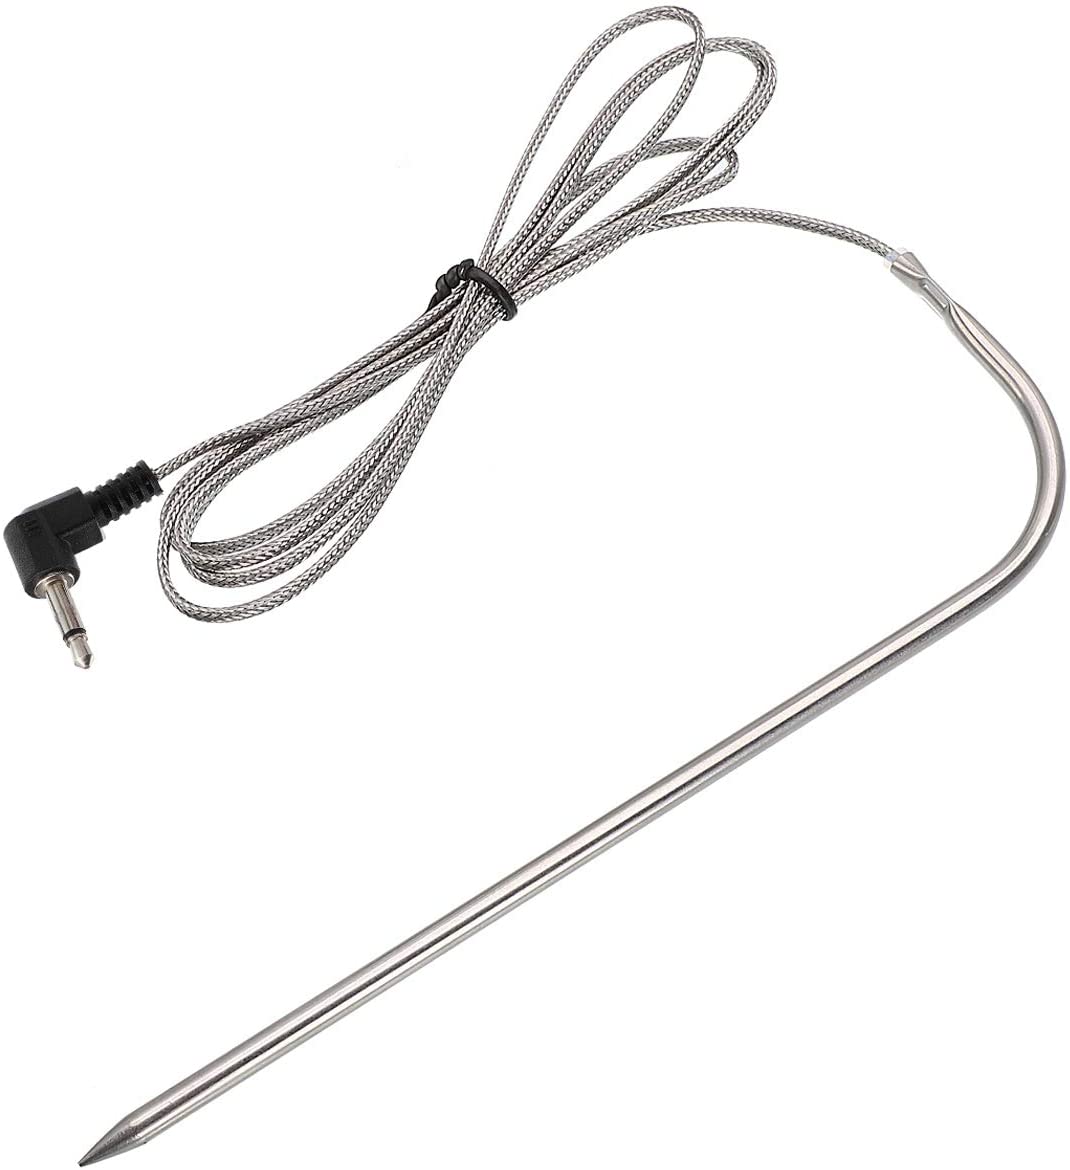 GrillPartsReplacement - Online BBQ Parts Retailer 3.5mm Plug Meat Probe for Pit Boss Navigator 700 (PB700G) Grills, Replacement High Temperature BBQ Digital Thermostat Meat Probes